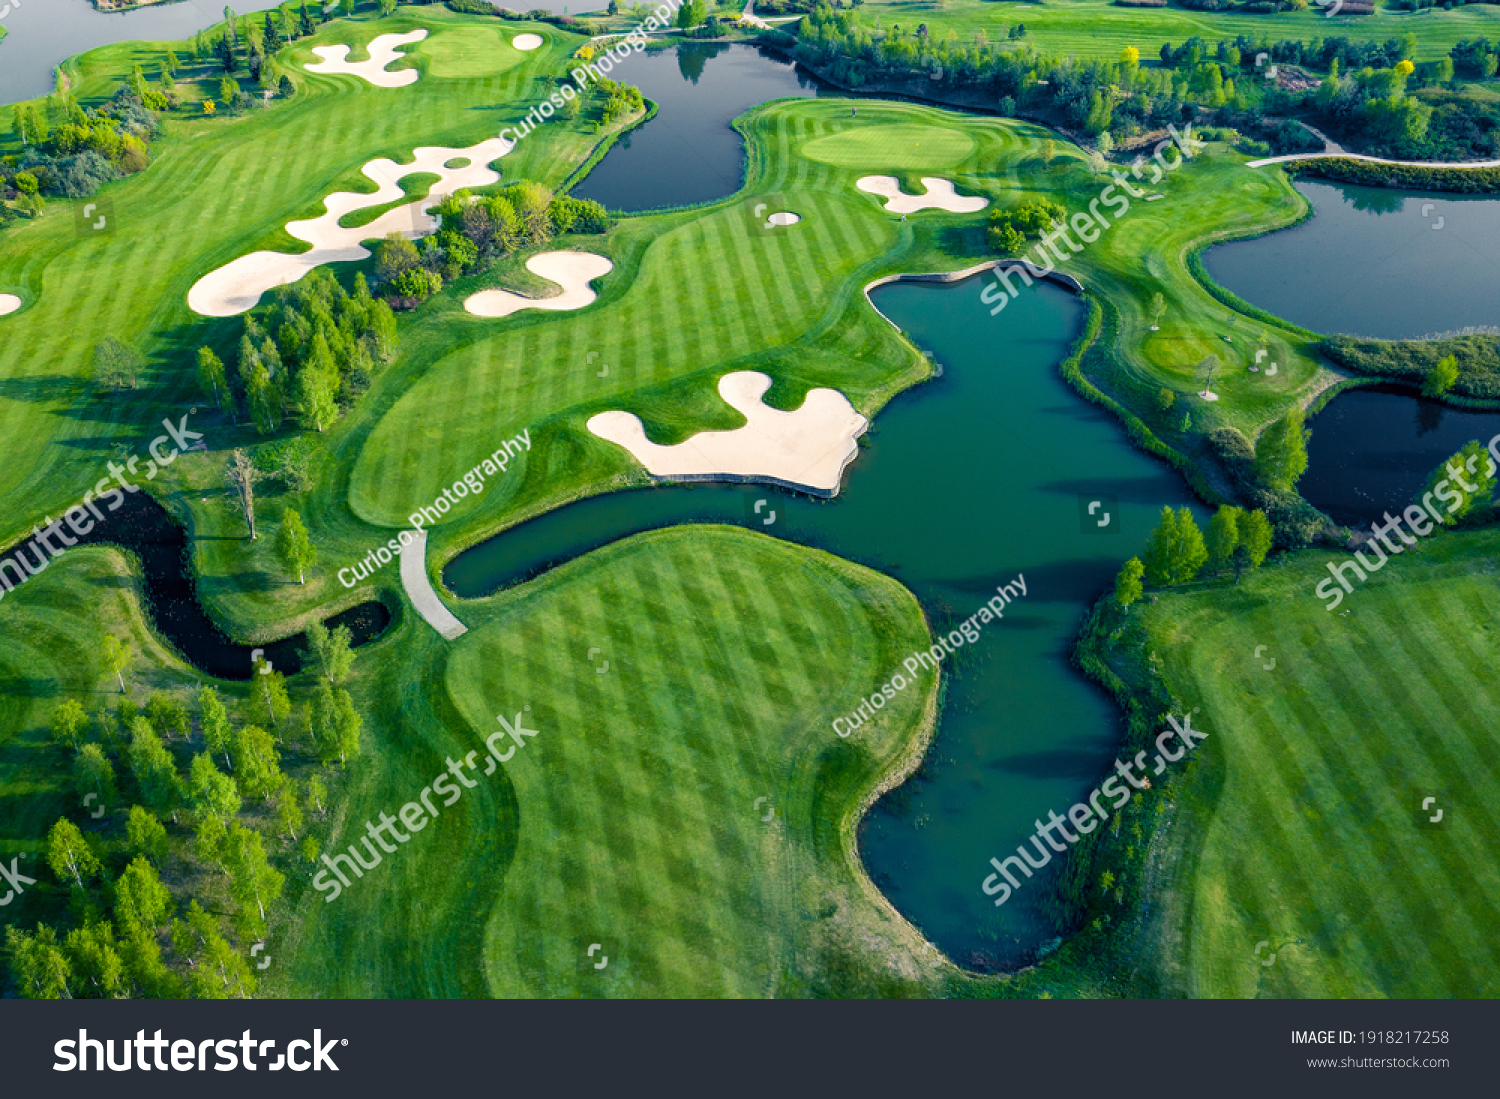 Aerial view of green grass and trees on a golf field. #1918217258